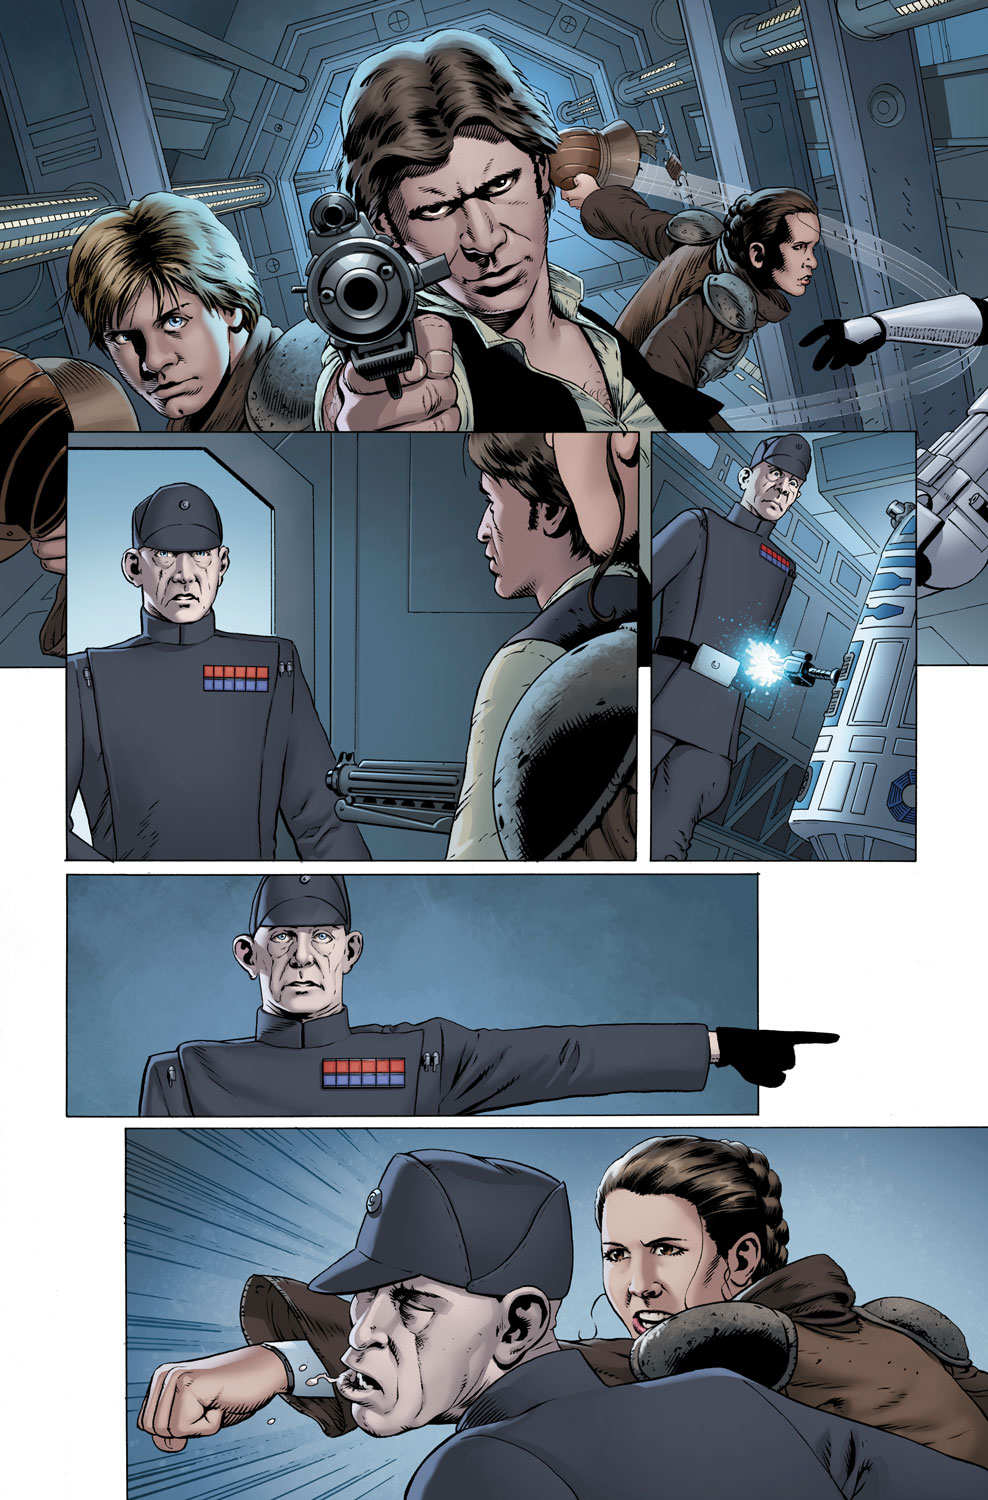 Star Wars Comics Are Getting Better